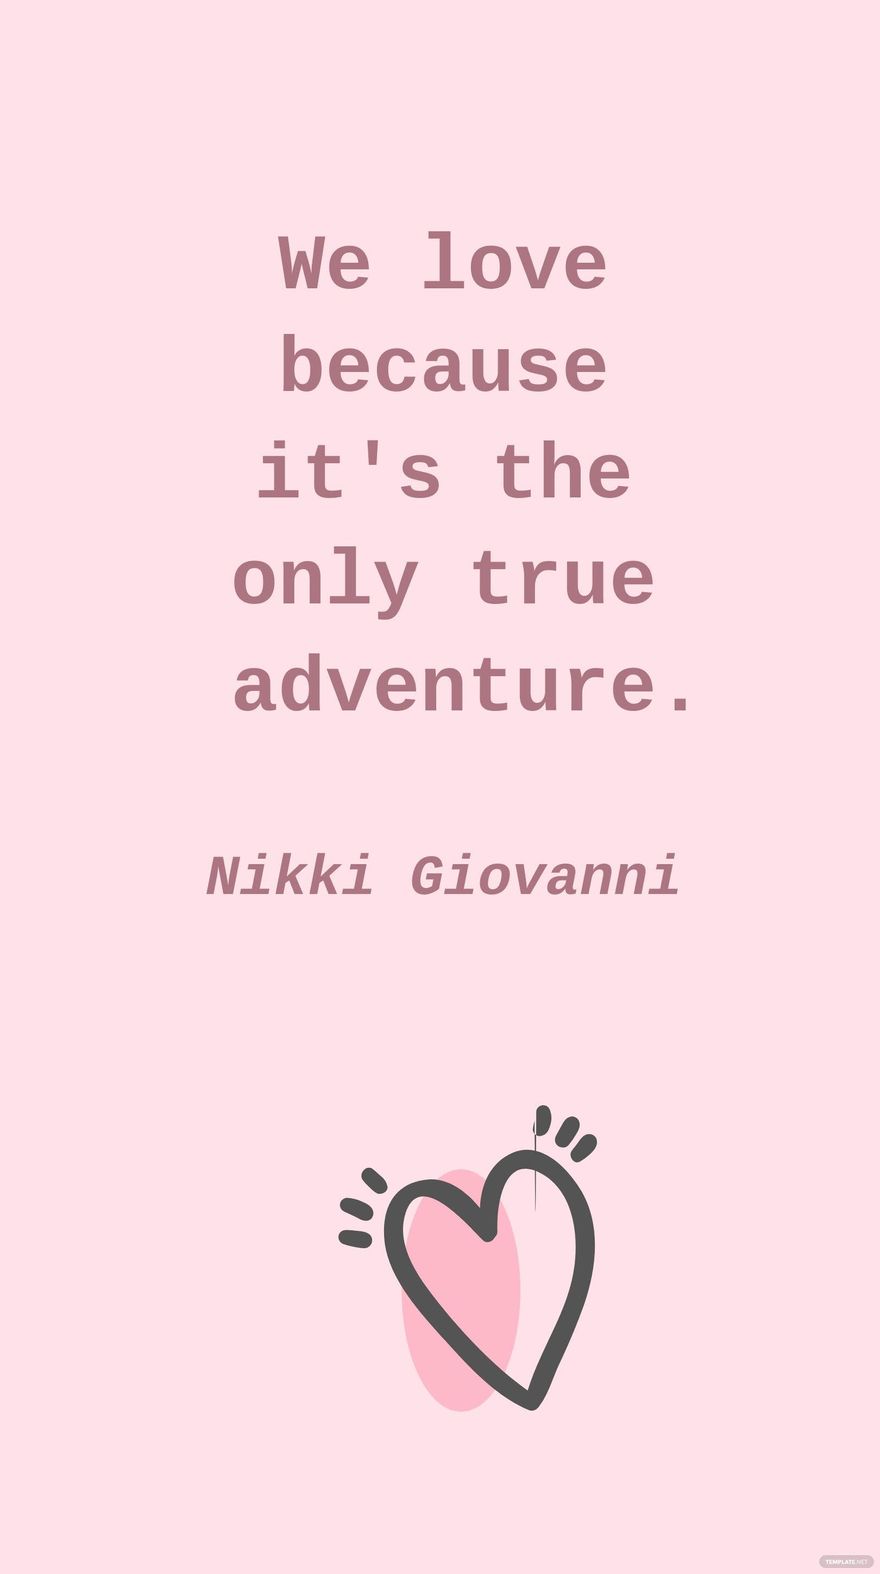 Nikki Giovanni - We love because it's the only true adventure. in JPG